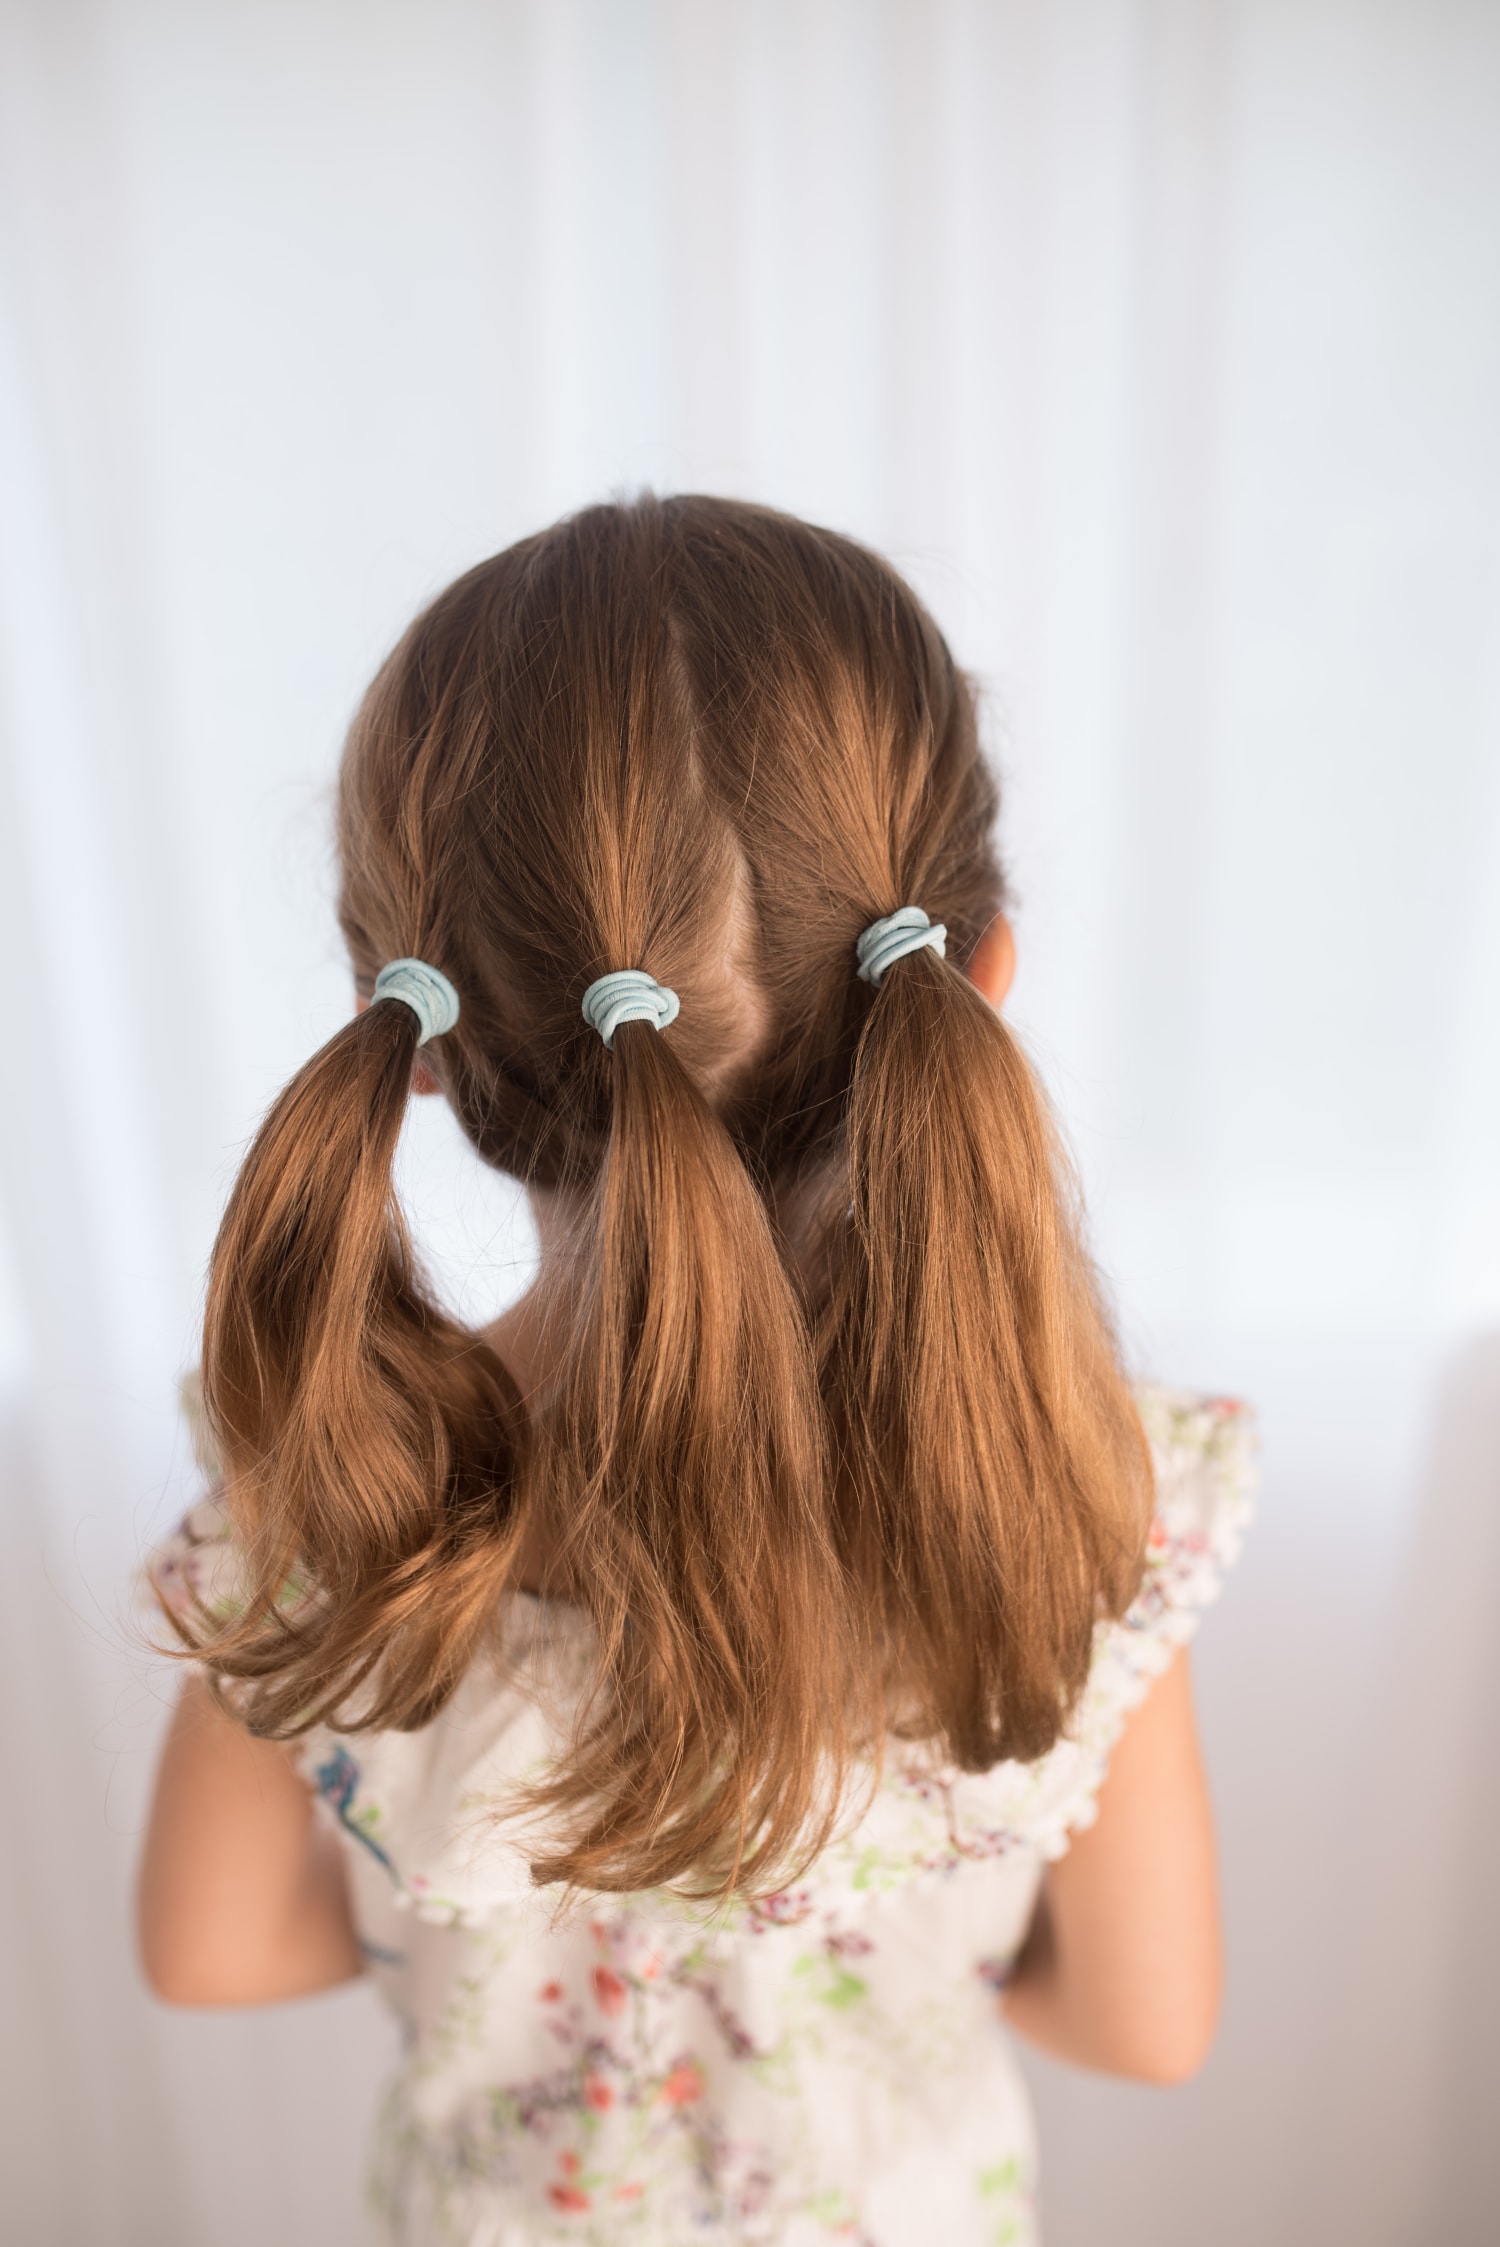 15 Back To School Hairstyles For Girls - September 2019